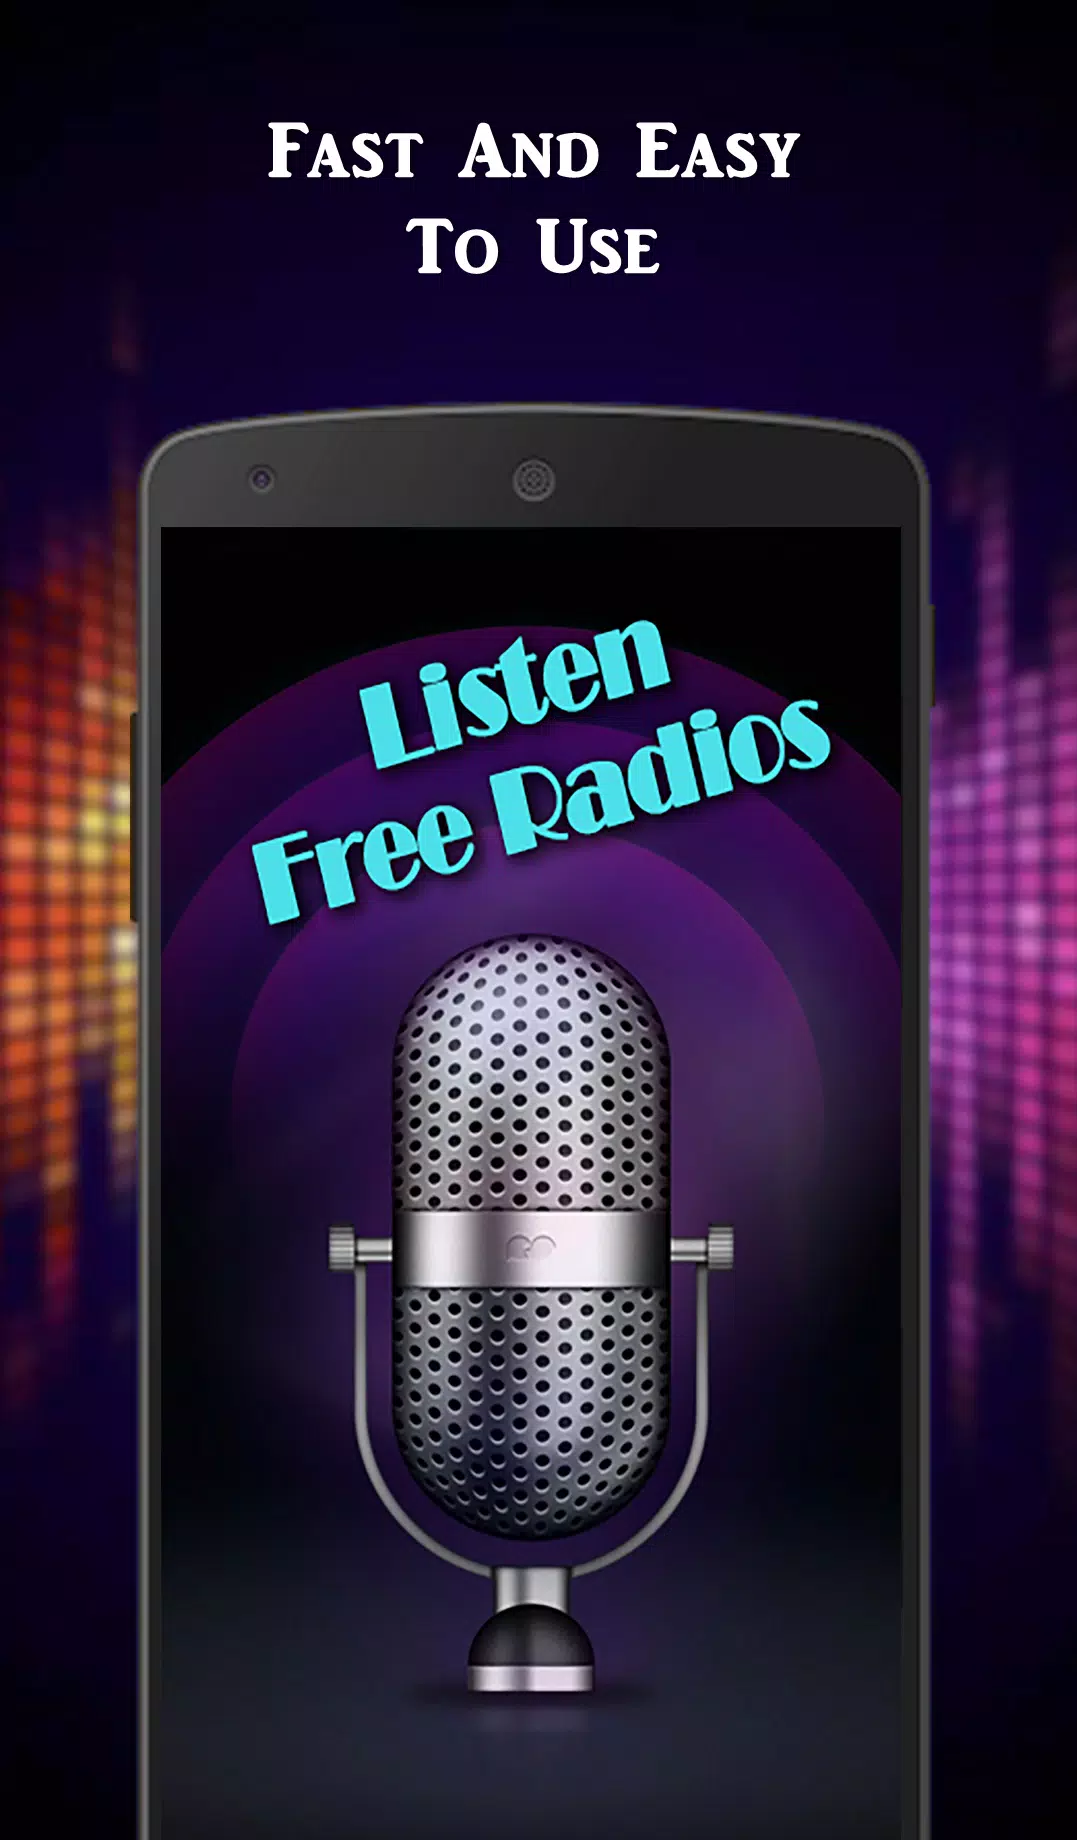 Radio WAWA Poland APK for Android Download